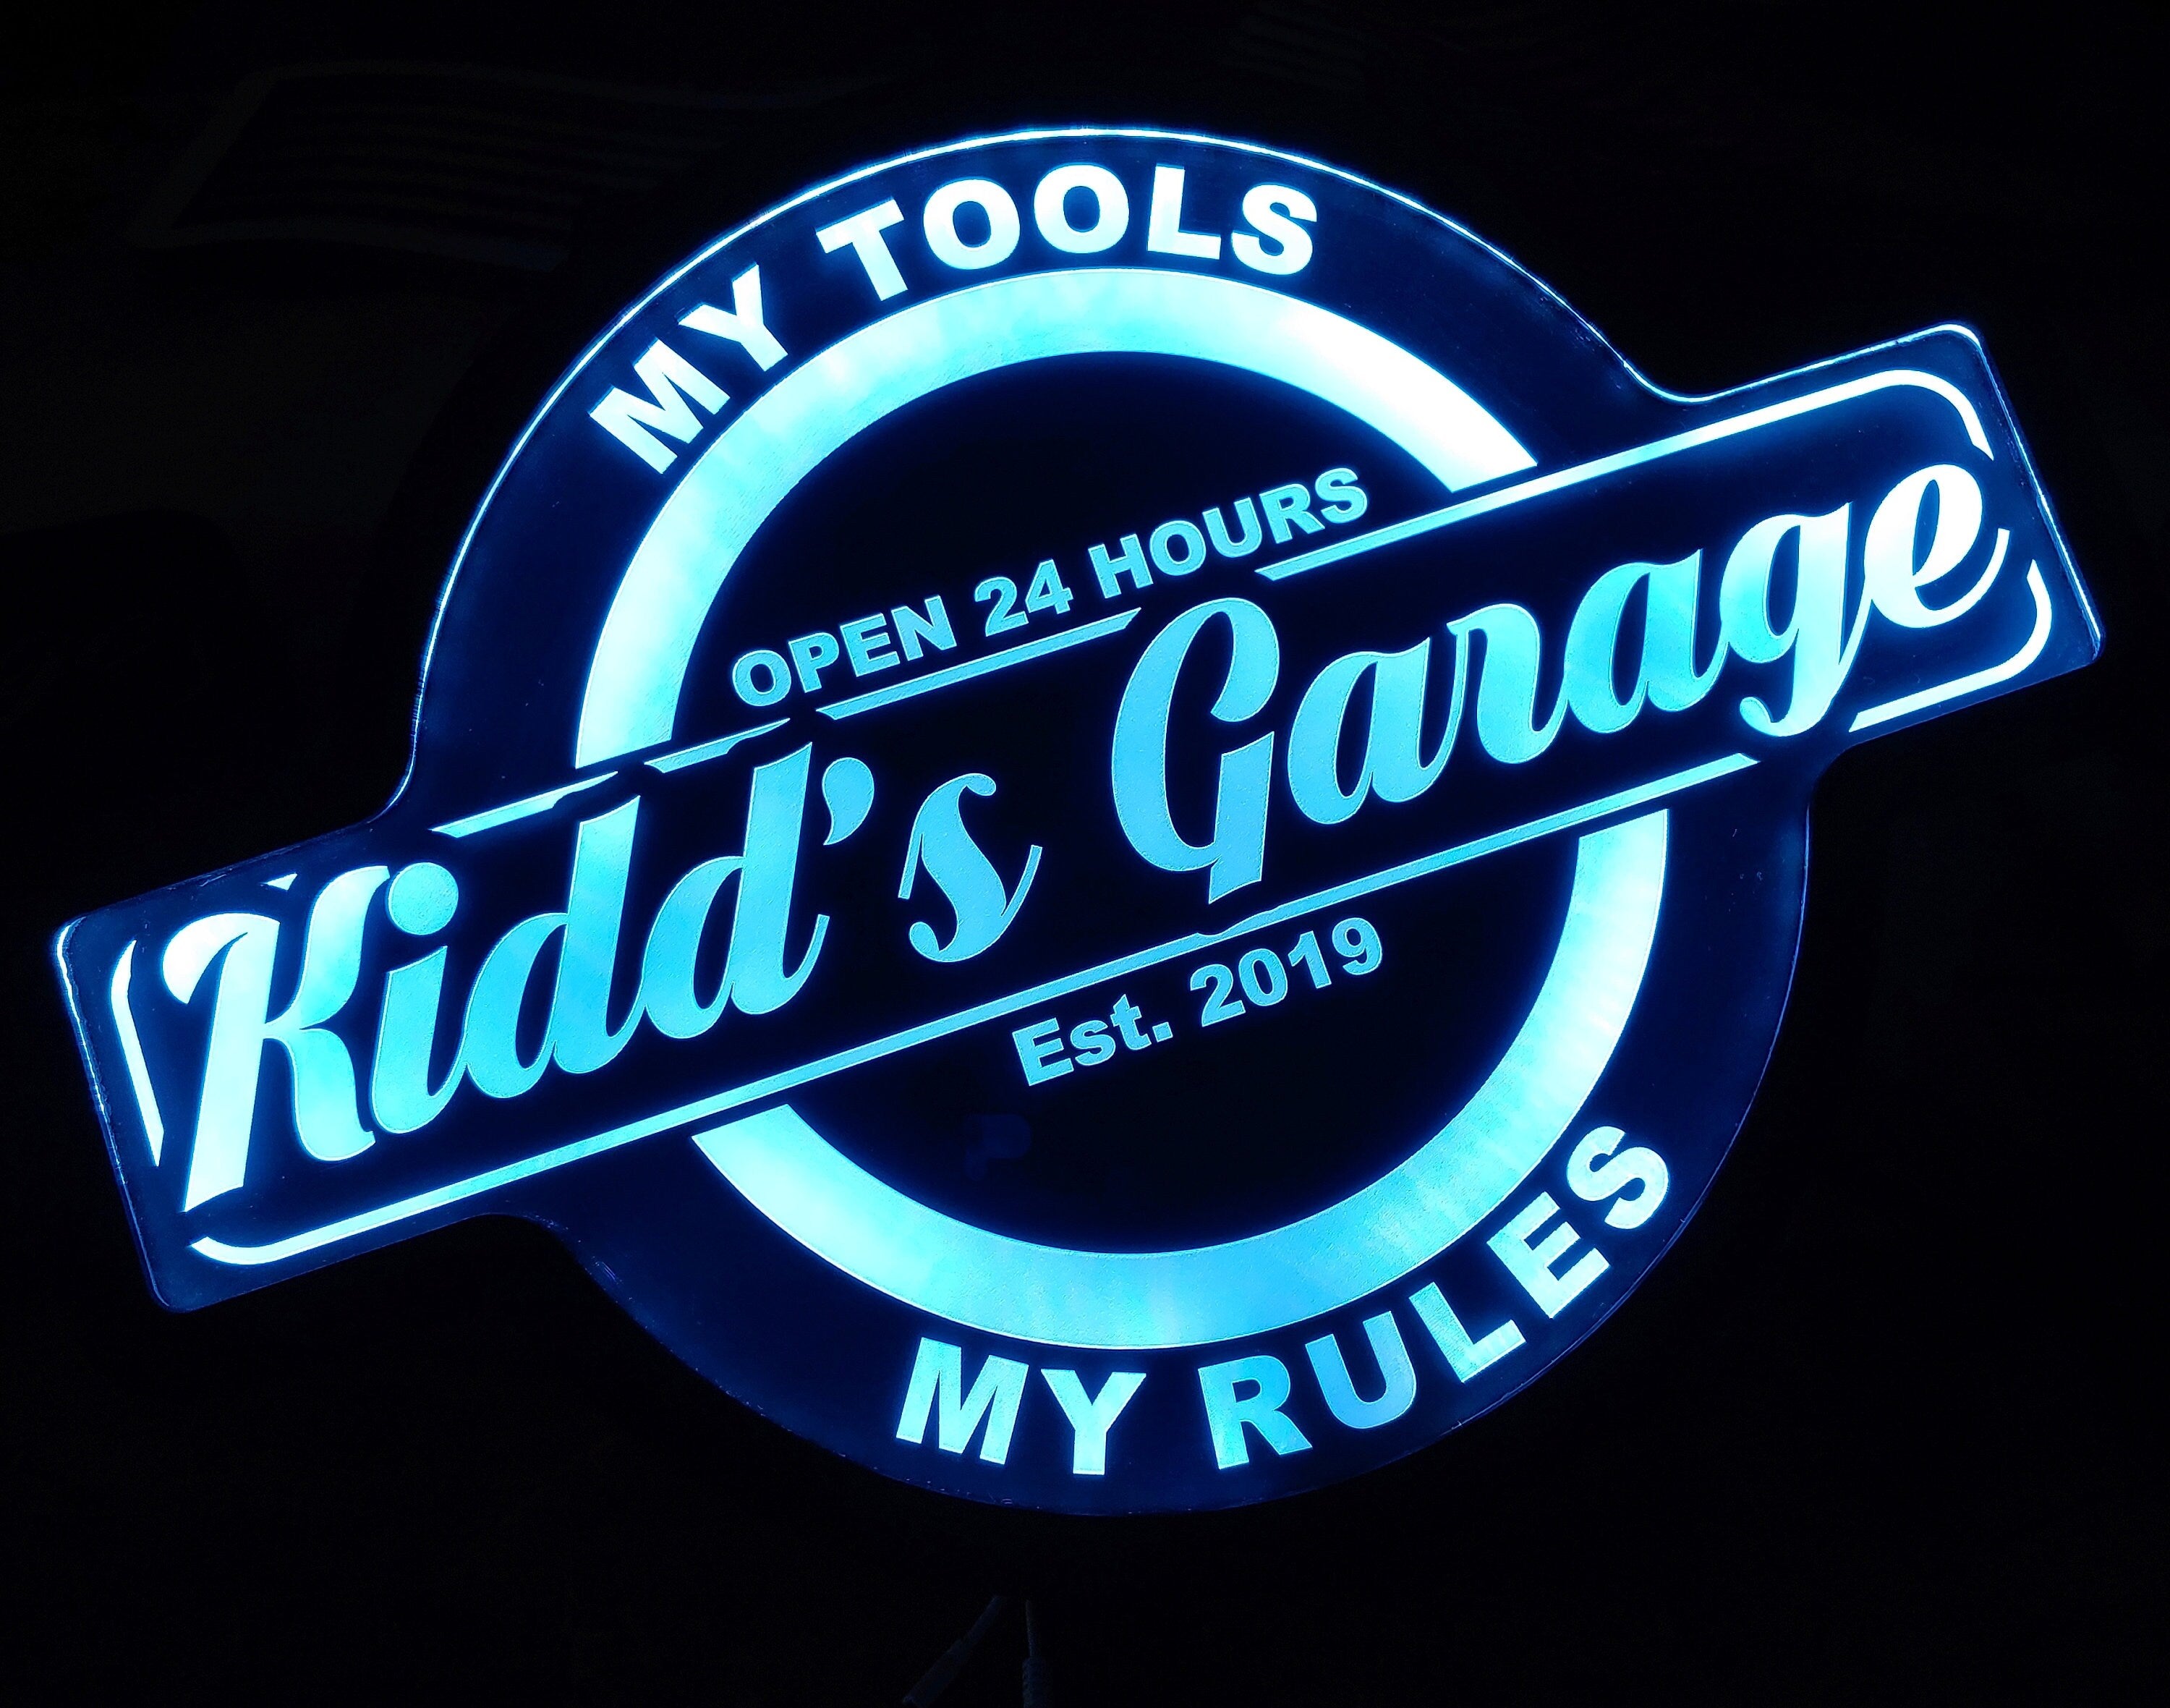 Custom My Tools, My Rules Garage Wall Led Sign Night Light Neon Like - Color Changing - 4 Sizes - Free Shipping